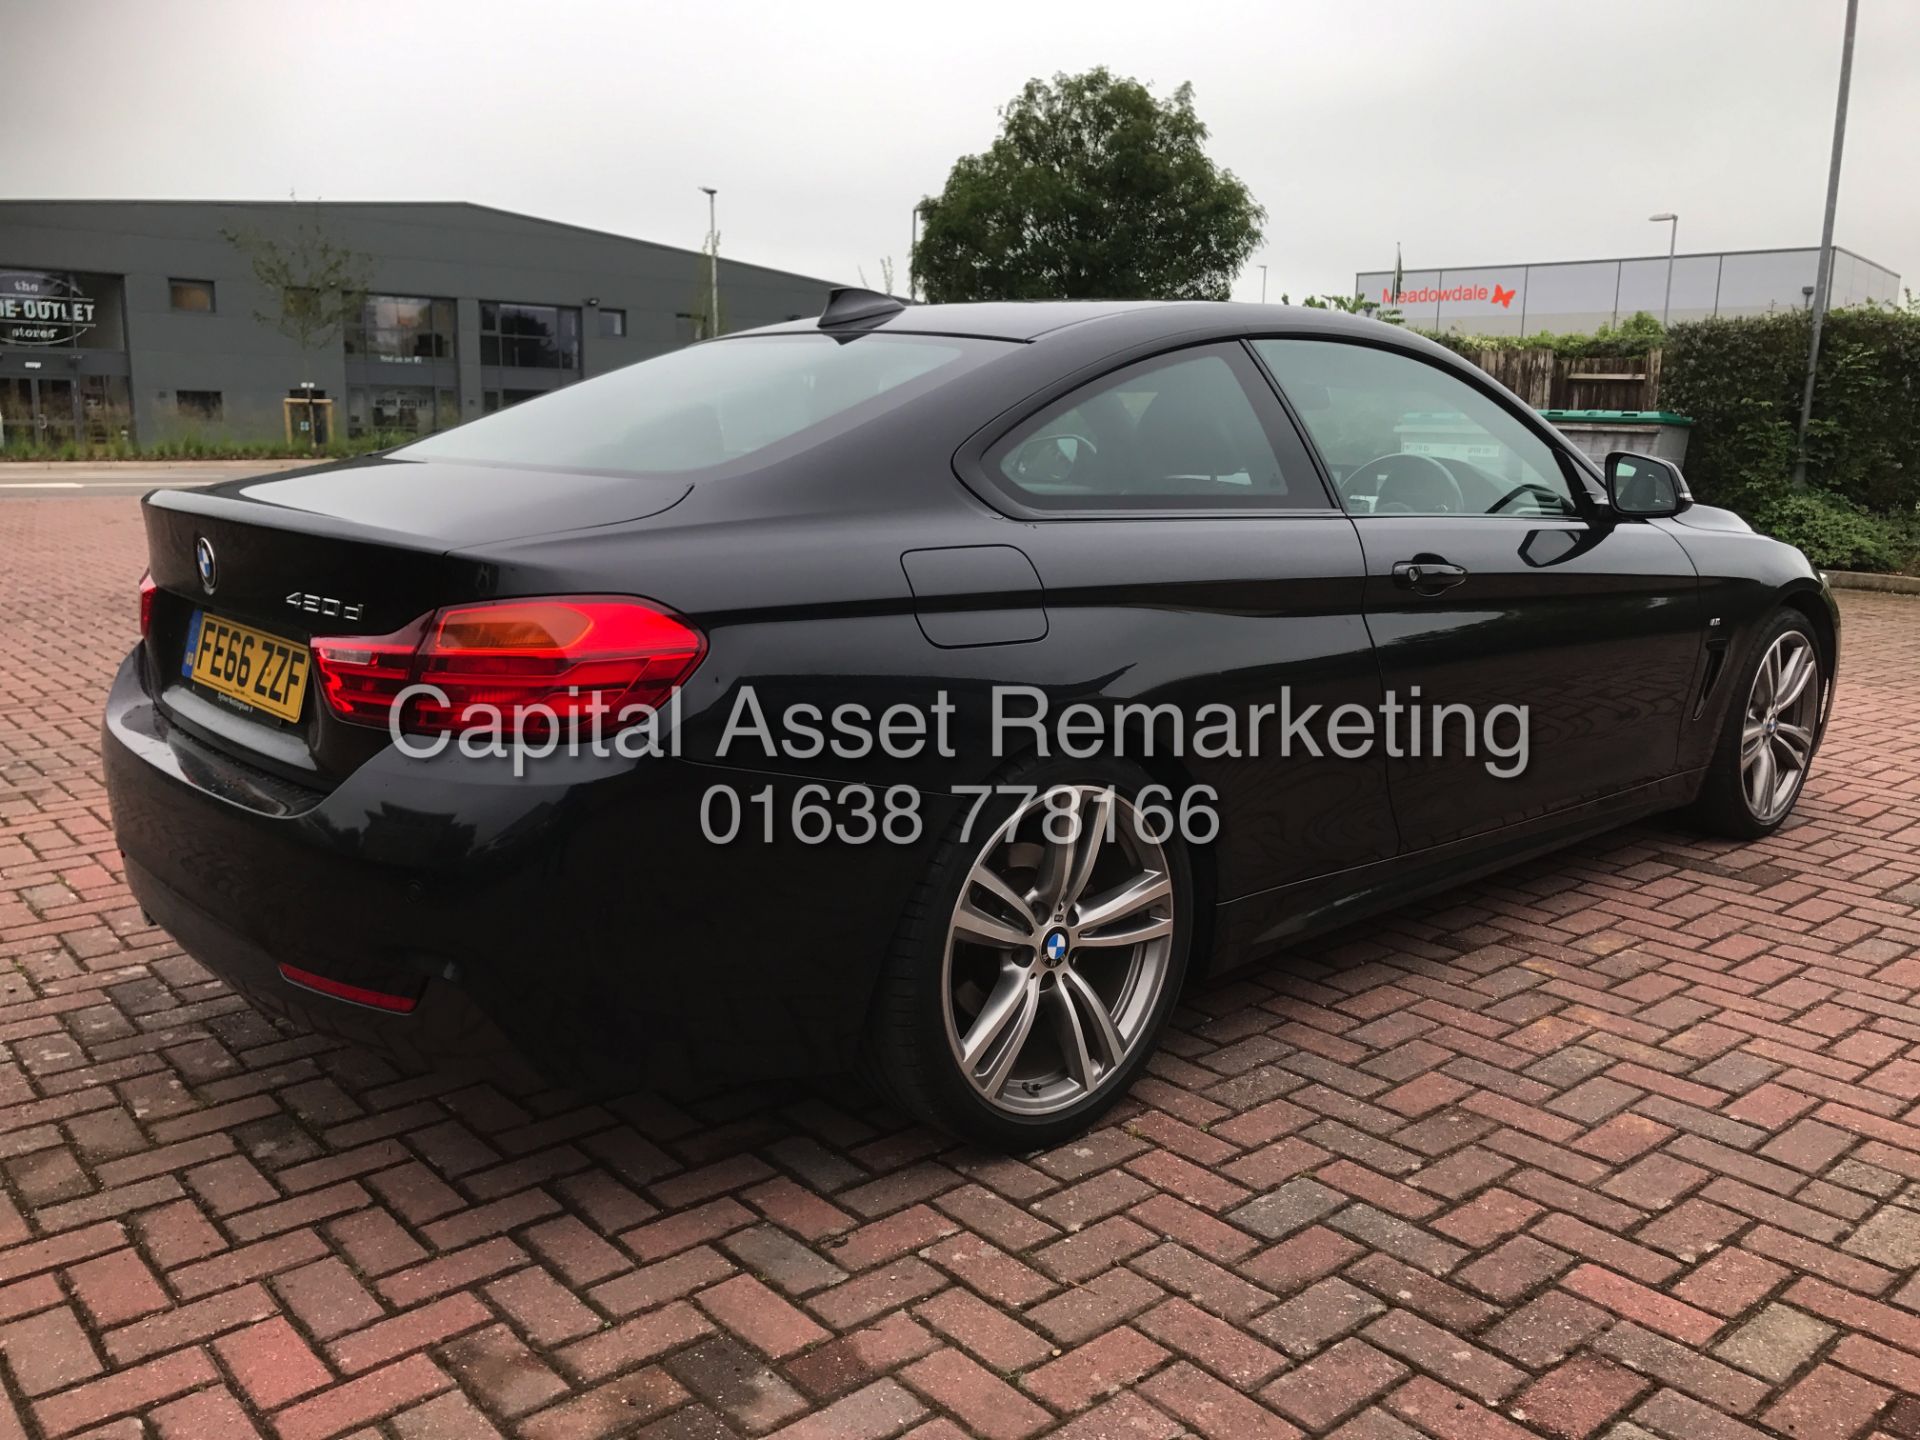 BMW 420D AUTO 8 SPEED "M-SPORT" COUPE (2017 MODEL) 1 OWNER WITH BMW HISTORY - SAT NAV - I DRIVE - Image 9 of 25